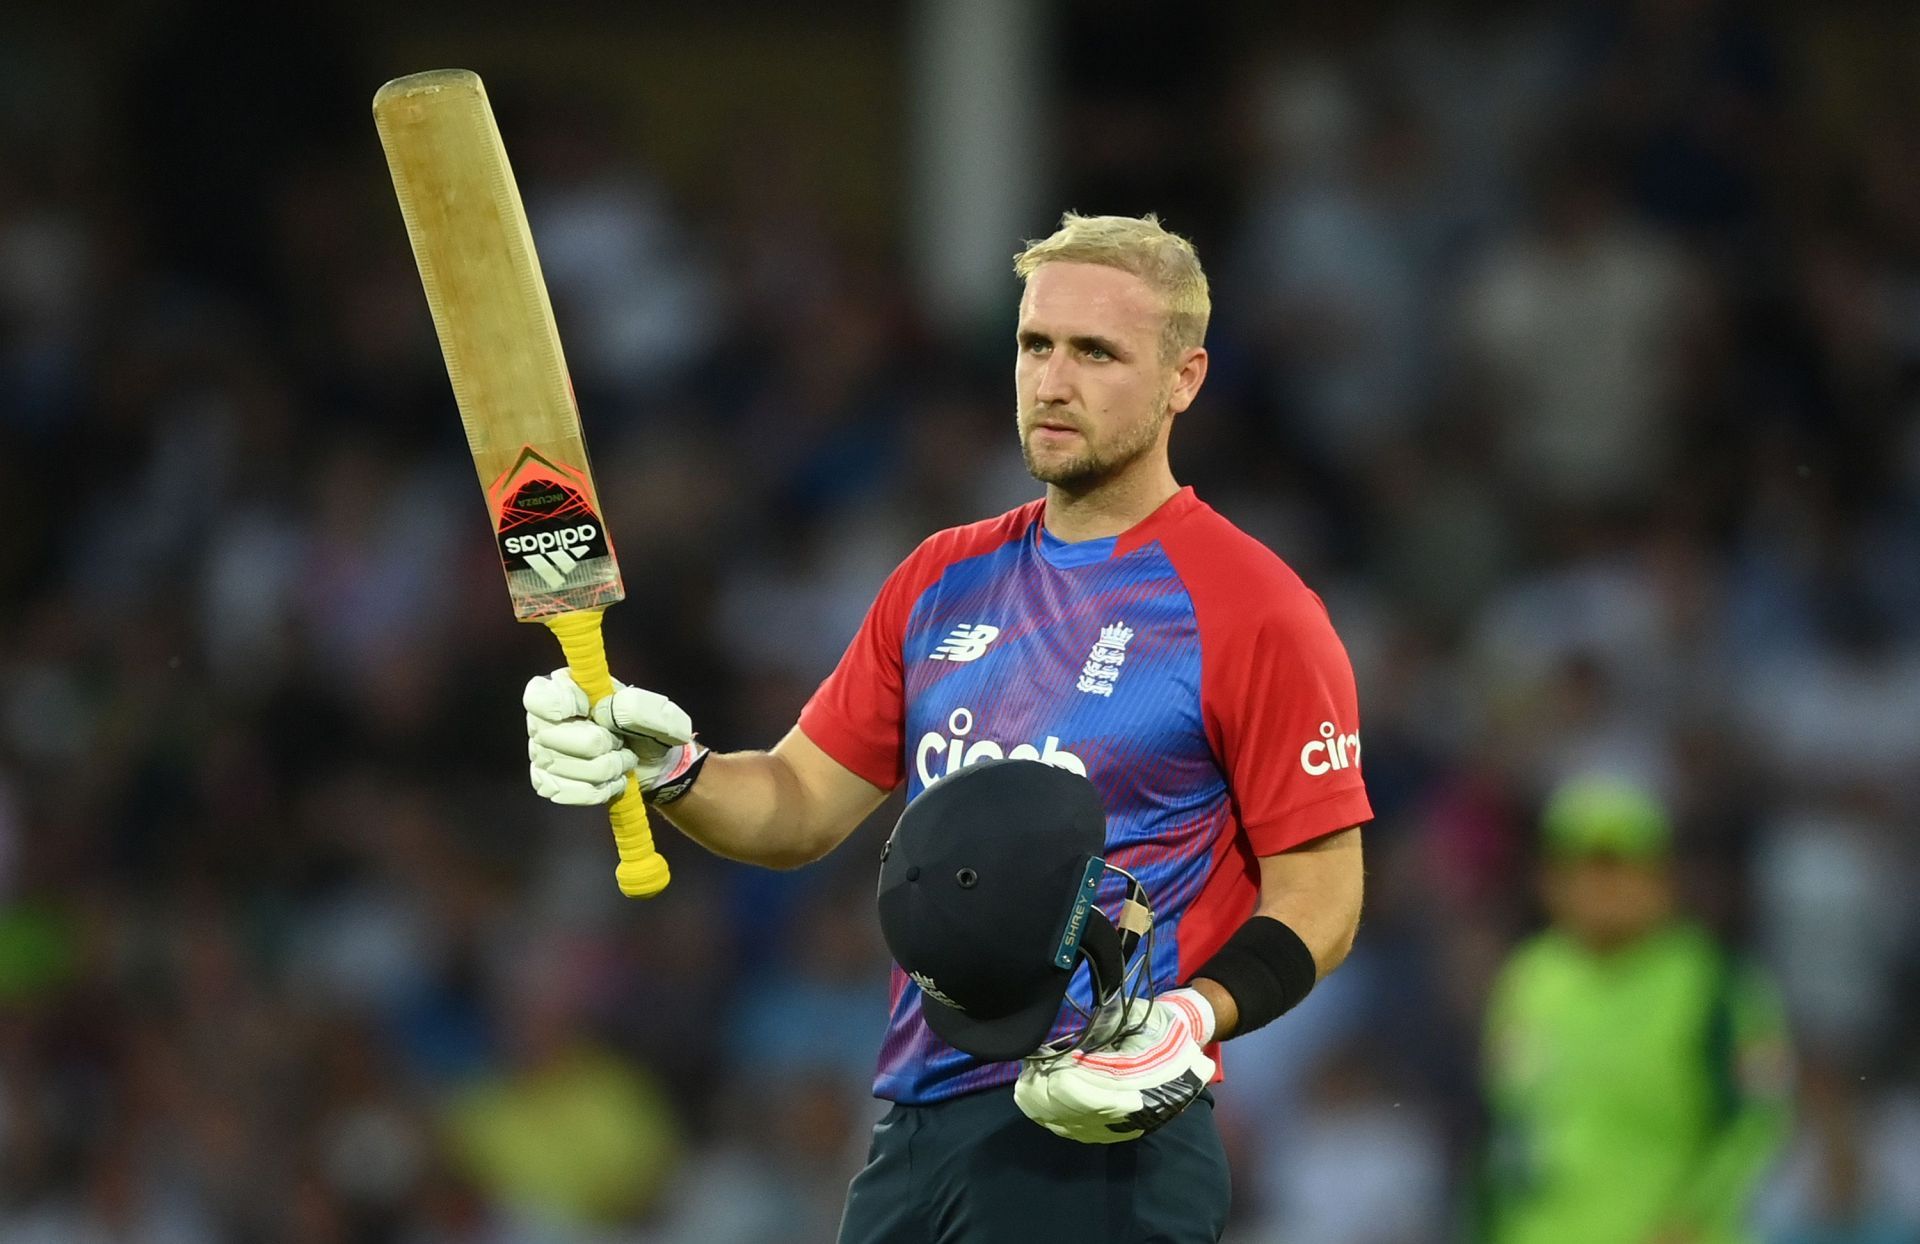 Liam Livingstone was in red-hot form prior to IPL 2021